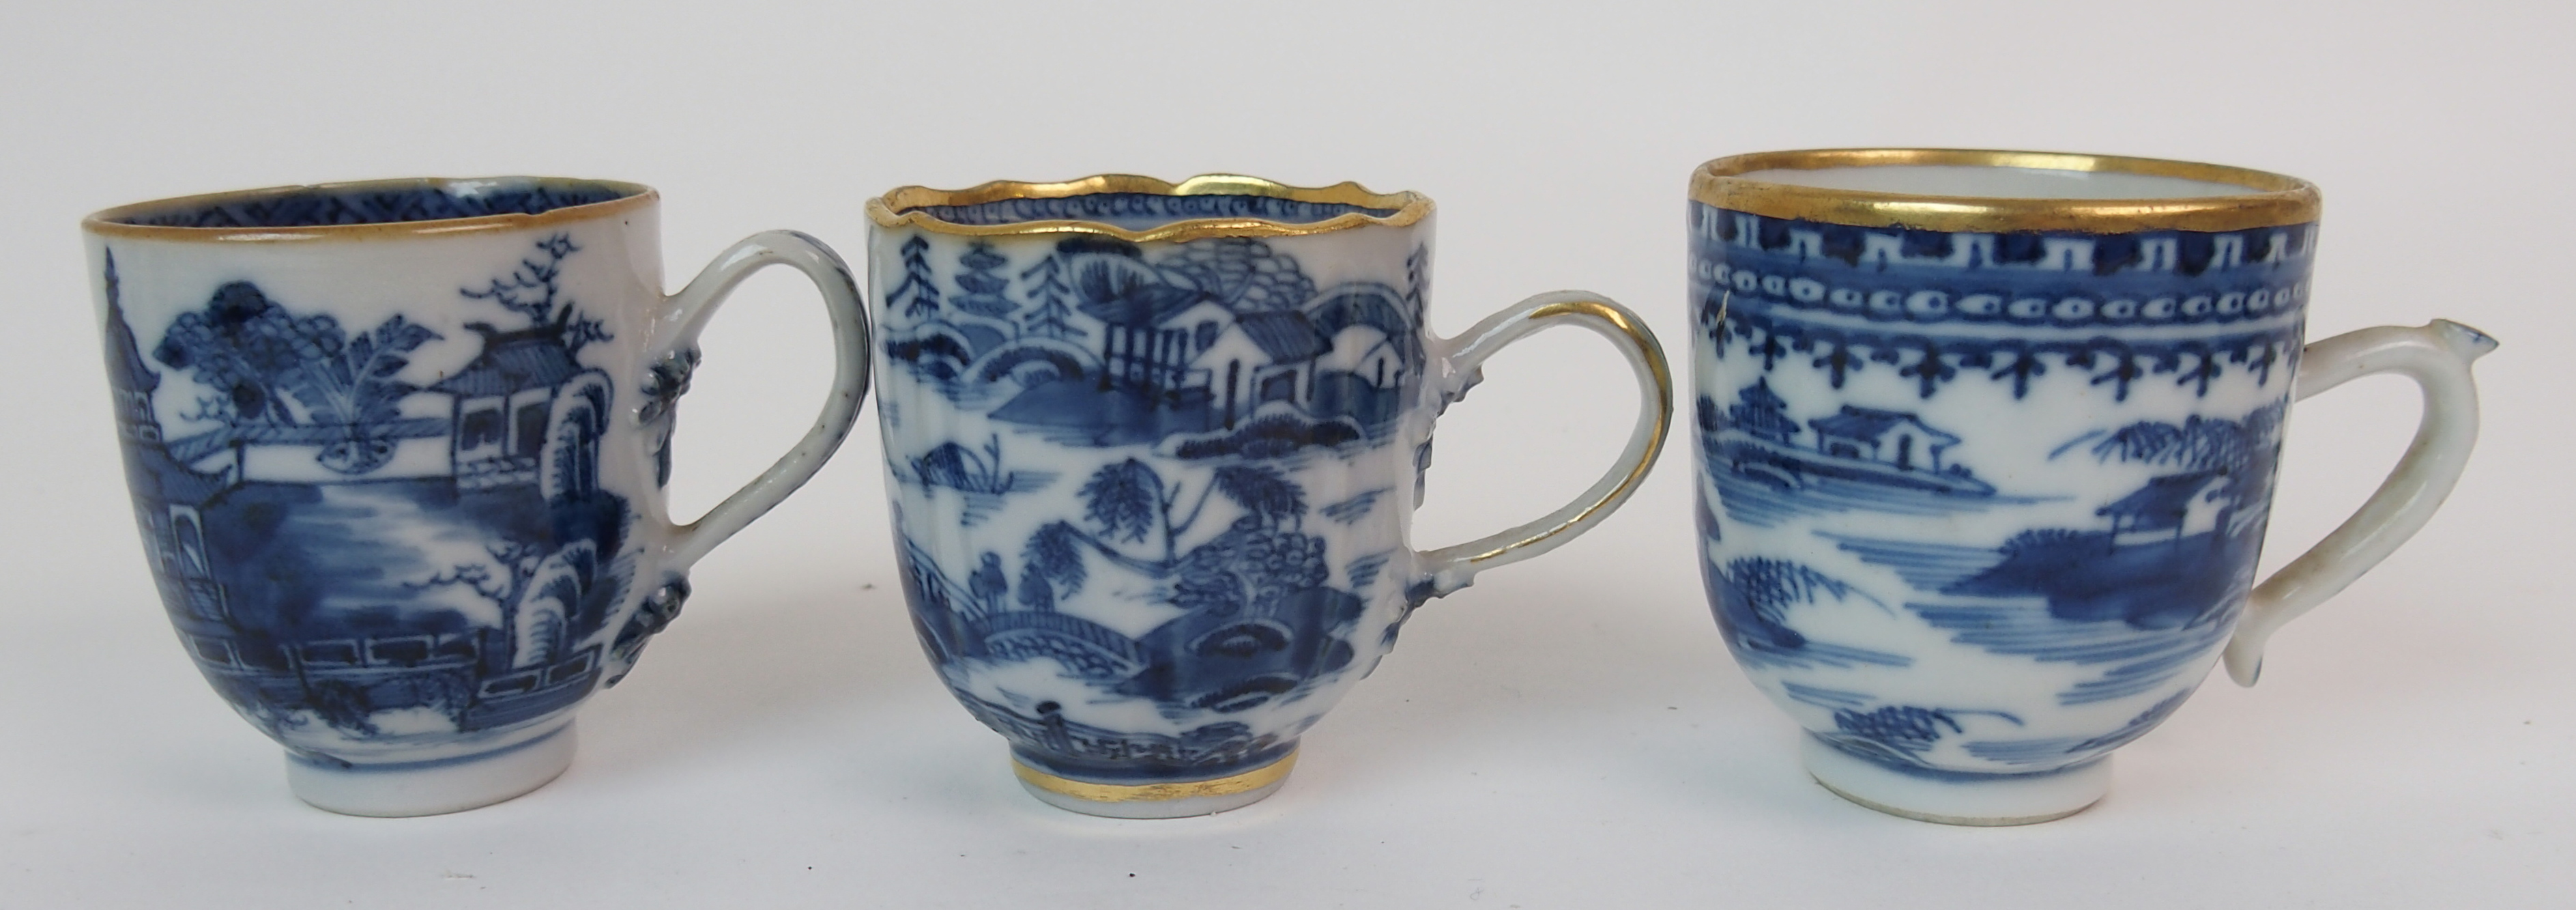 A group of twenty-three Chinese export teacups painted with typical landscapes and gilt rims, - Image 7 of 10